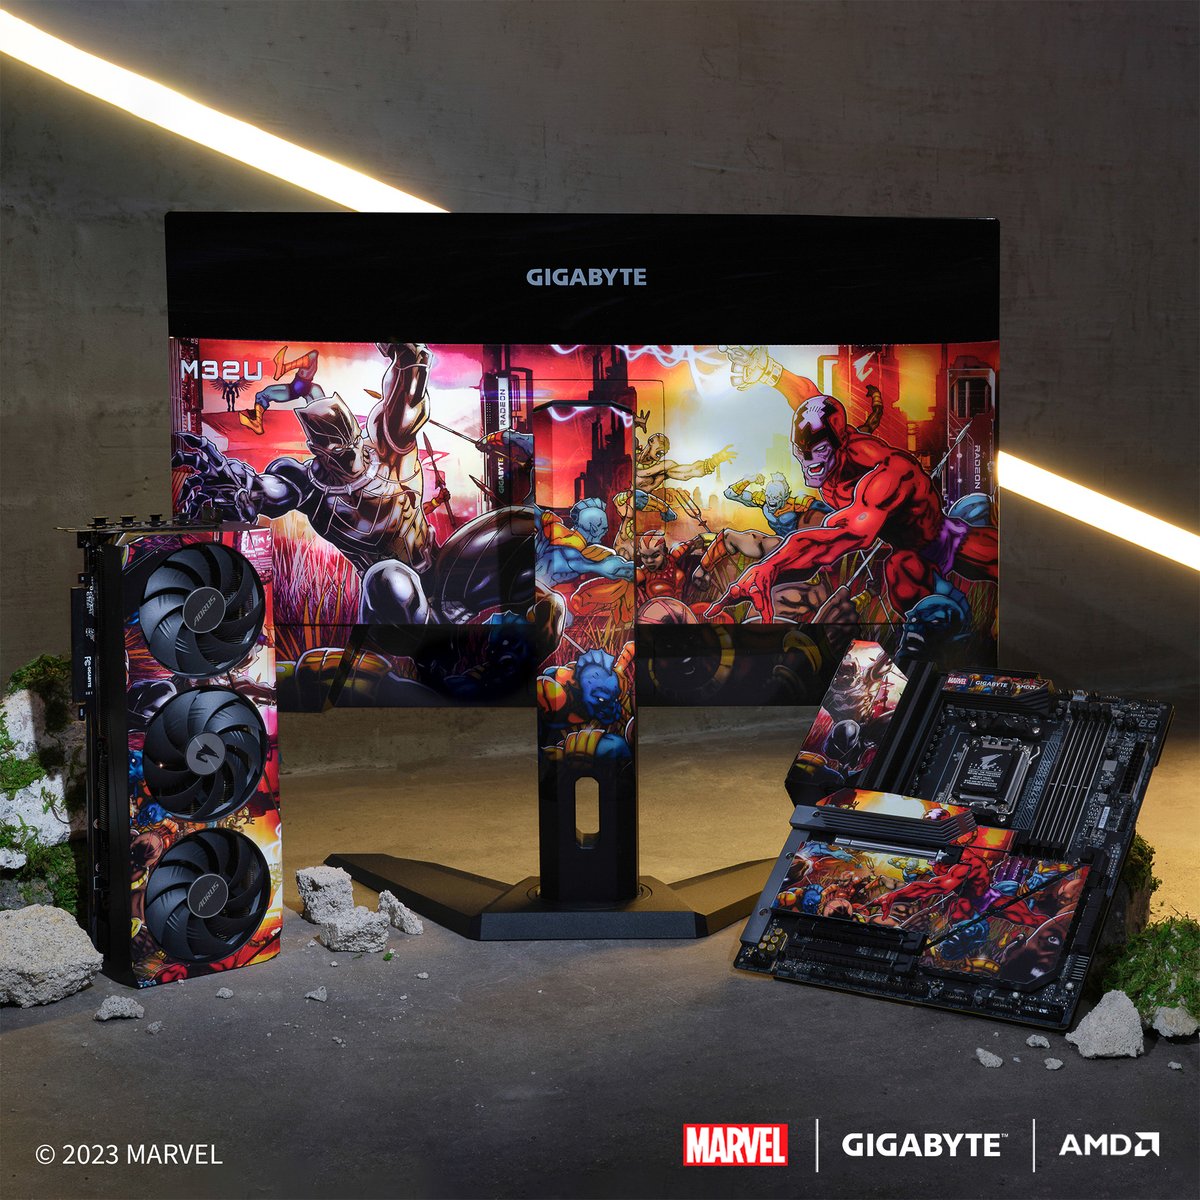 There's no way Klaw and Atlanteans can steal Wakandan technology with Marvel's Black Panther here. #AORUSUnleashed AMD Gaming
Want to win this custom @amdryzen X670E motherboard, @amdradeon RX 7900 XTX graphics card, and monitor set? Enter here: gigabyte.com/us/aorus-unlea…